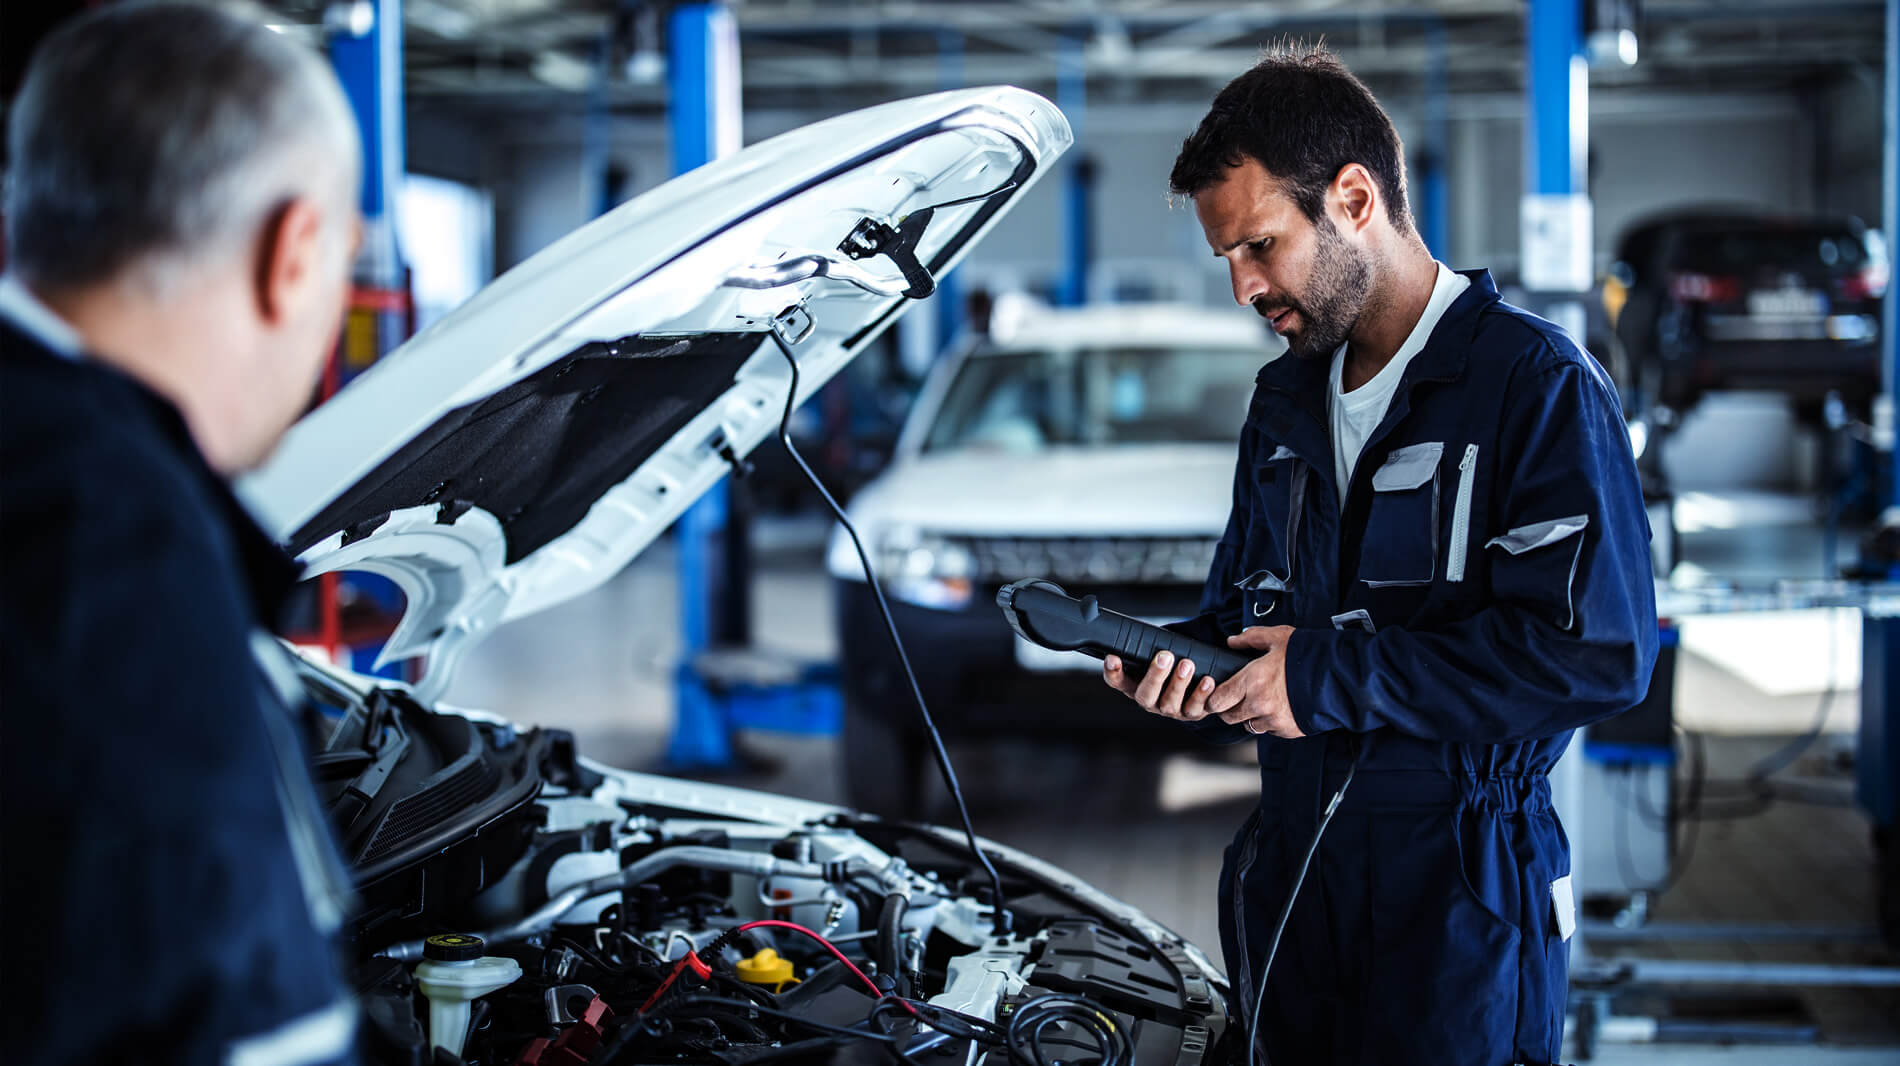 Our team of trustworthy Midland Mechanics offer scanning & fault diagnosis services. If you're in need of a car service, Midland Tune and Service is the cost-effective and reliable solution.